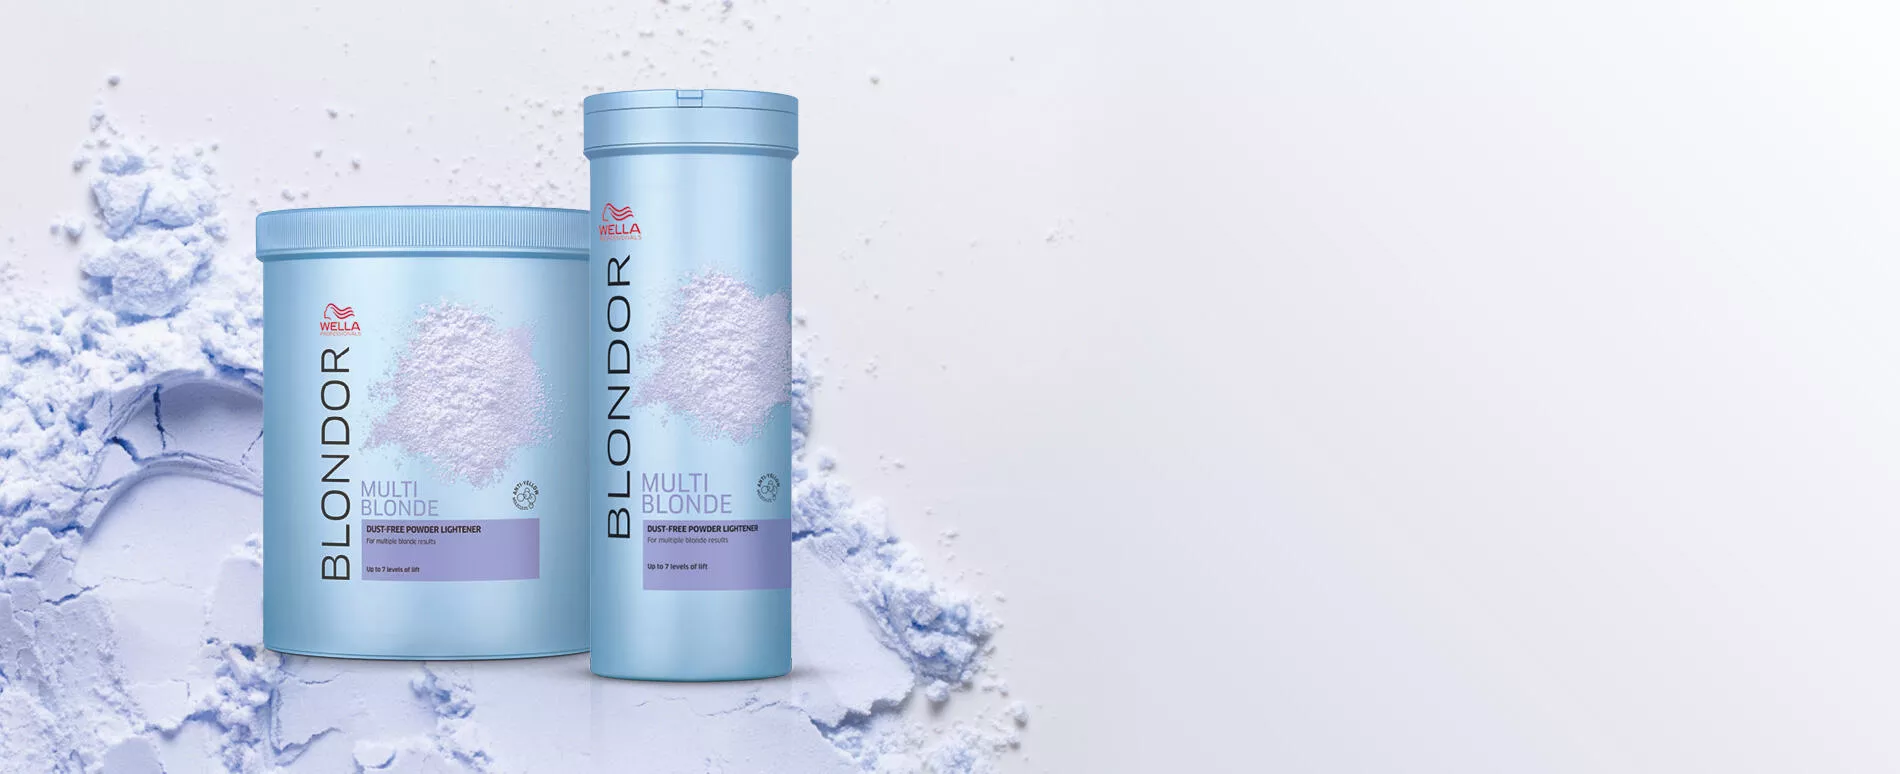 Range of Wella Professionals Blondor products, with white powder sprinkled in the background